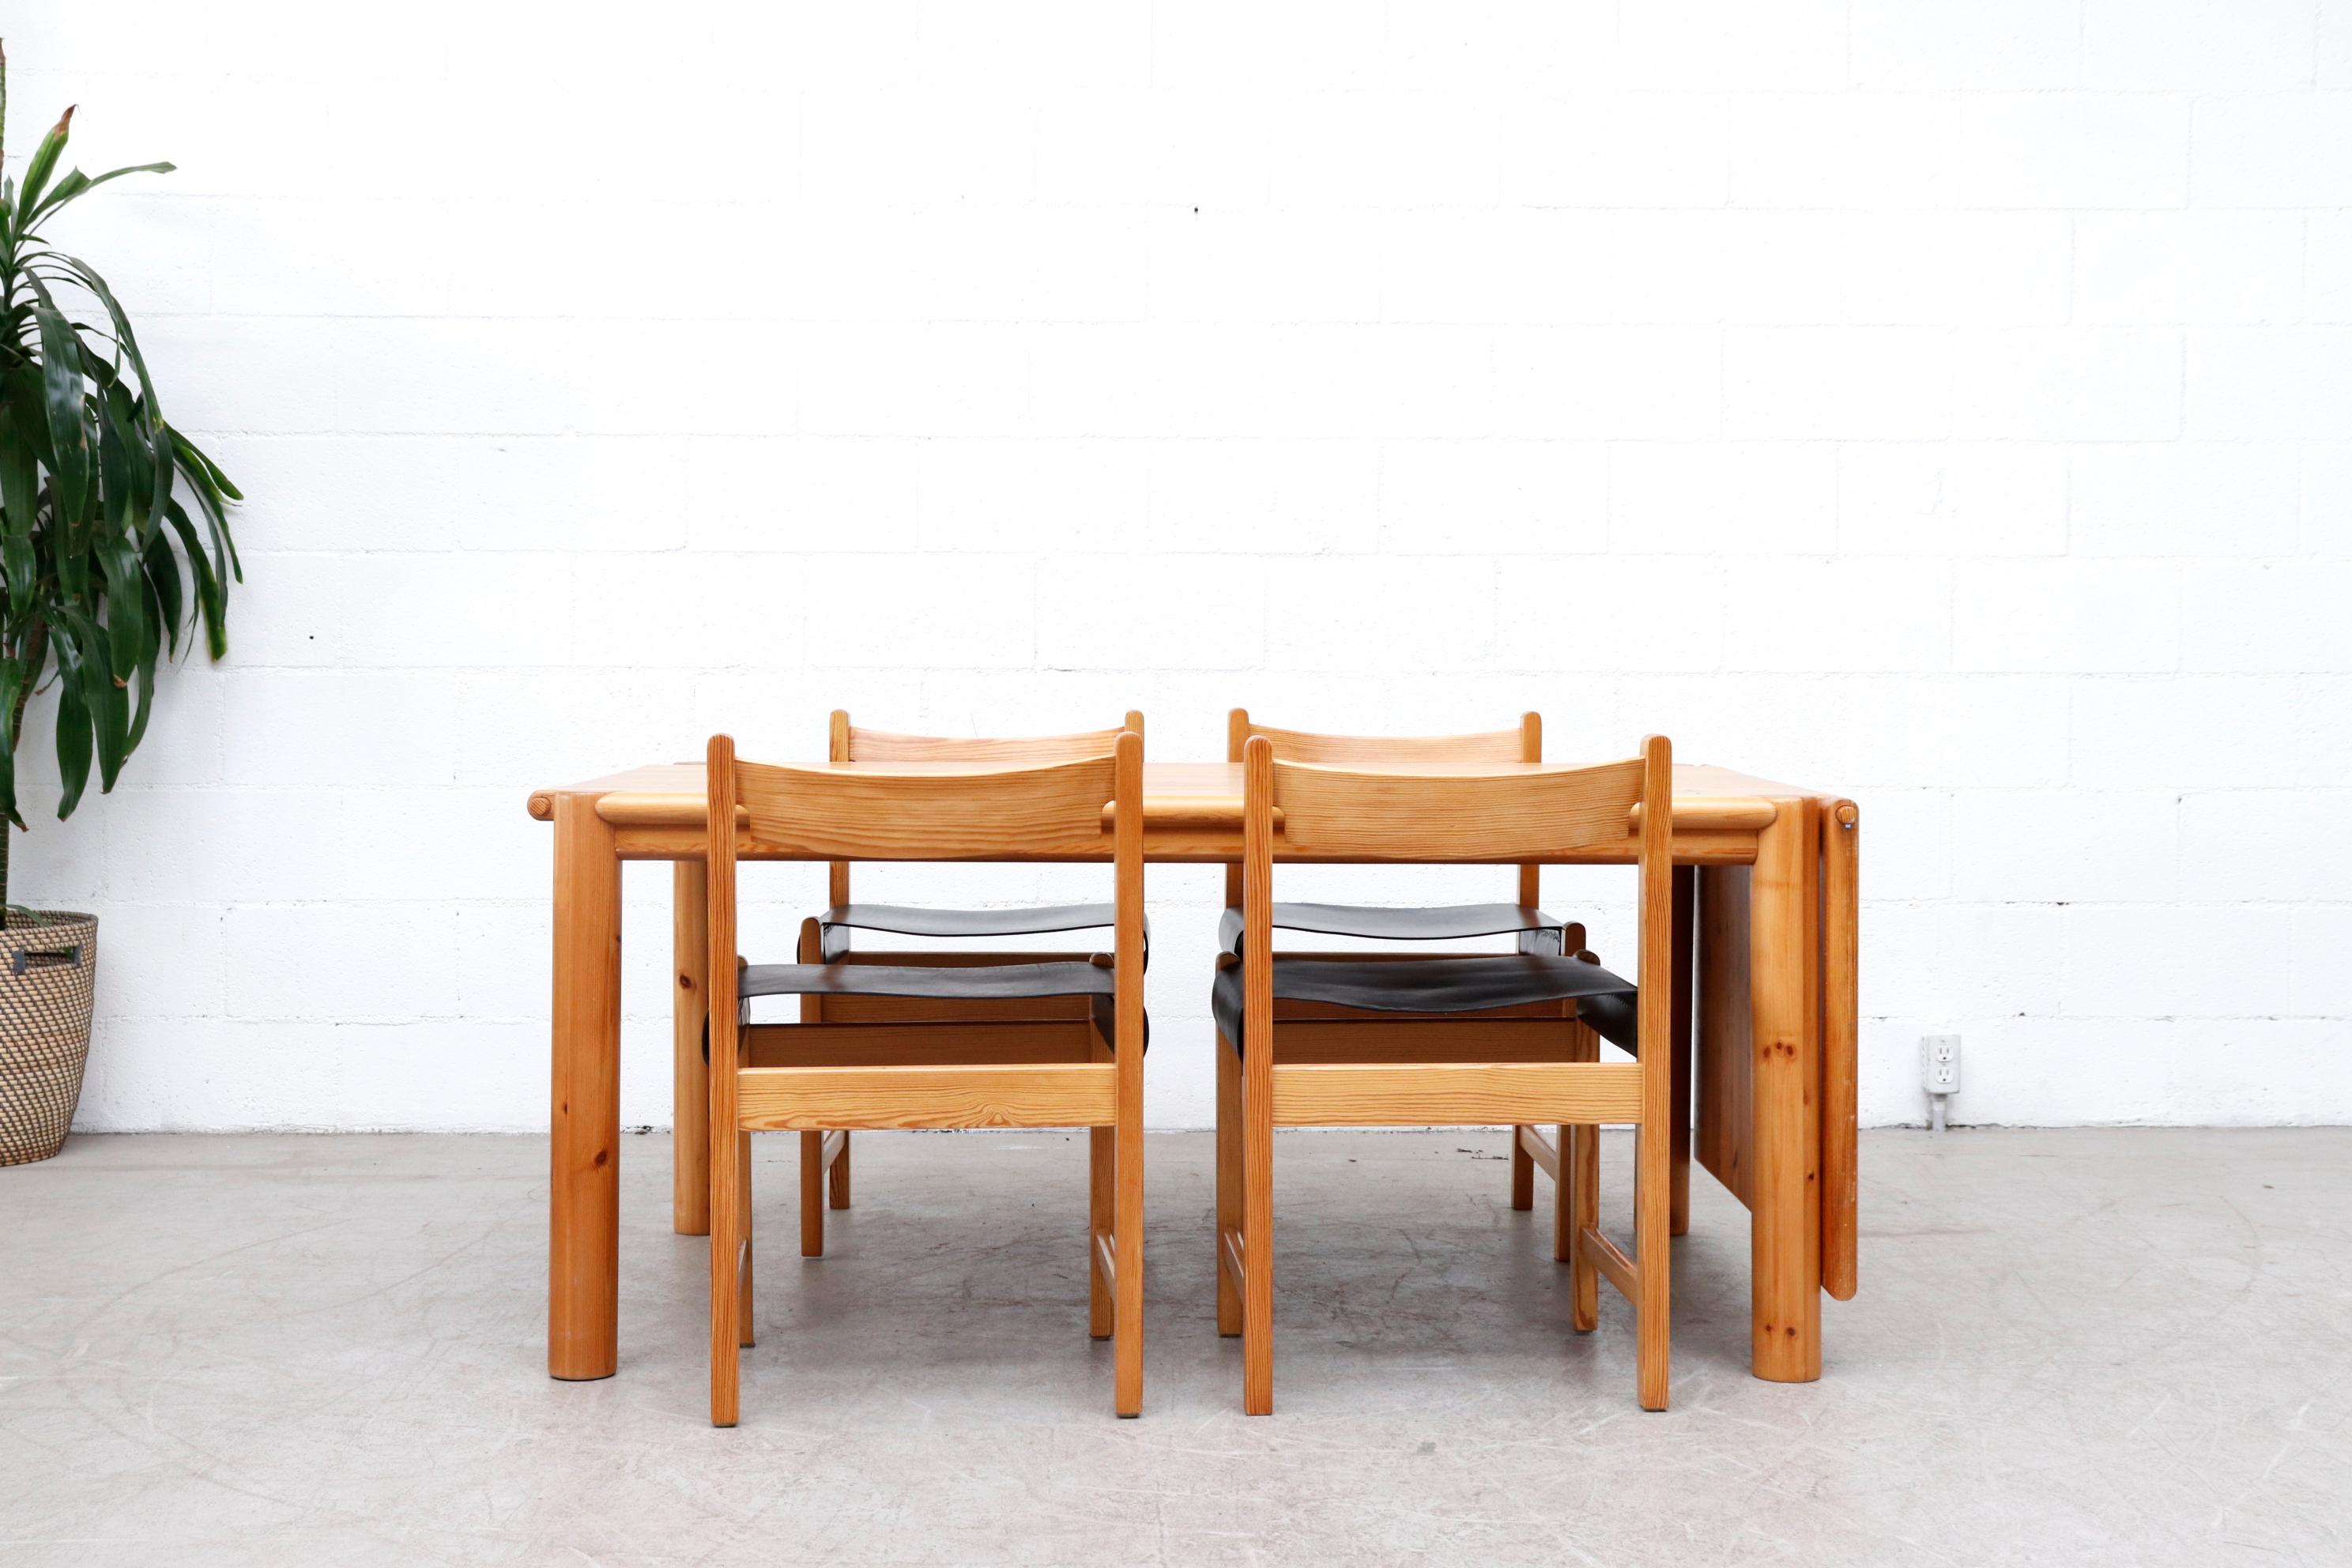 Gorgeous pine dining table by Rainer Daumiller for Hirtshals Savvaerk, Denmark. Lightly refinished rectangle dining table with one single removable leaf and fat round legs. Leaf can be placed on either side of the table with matching wood pegs. In